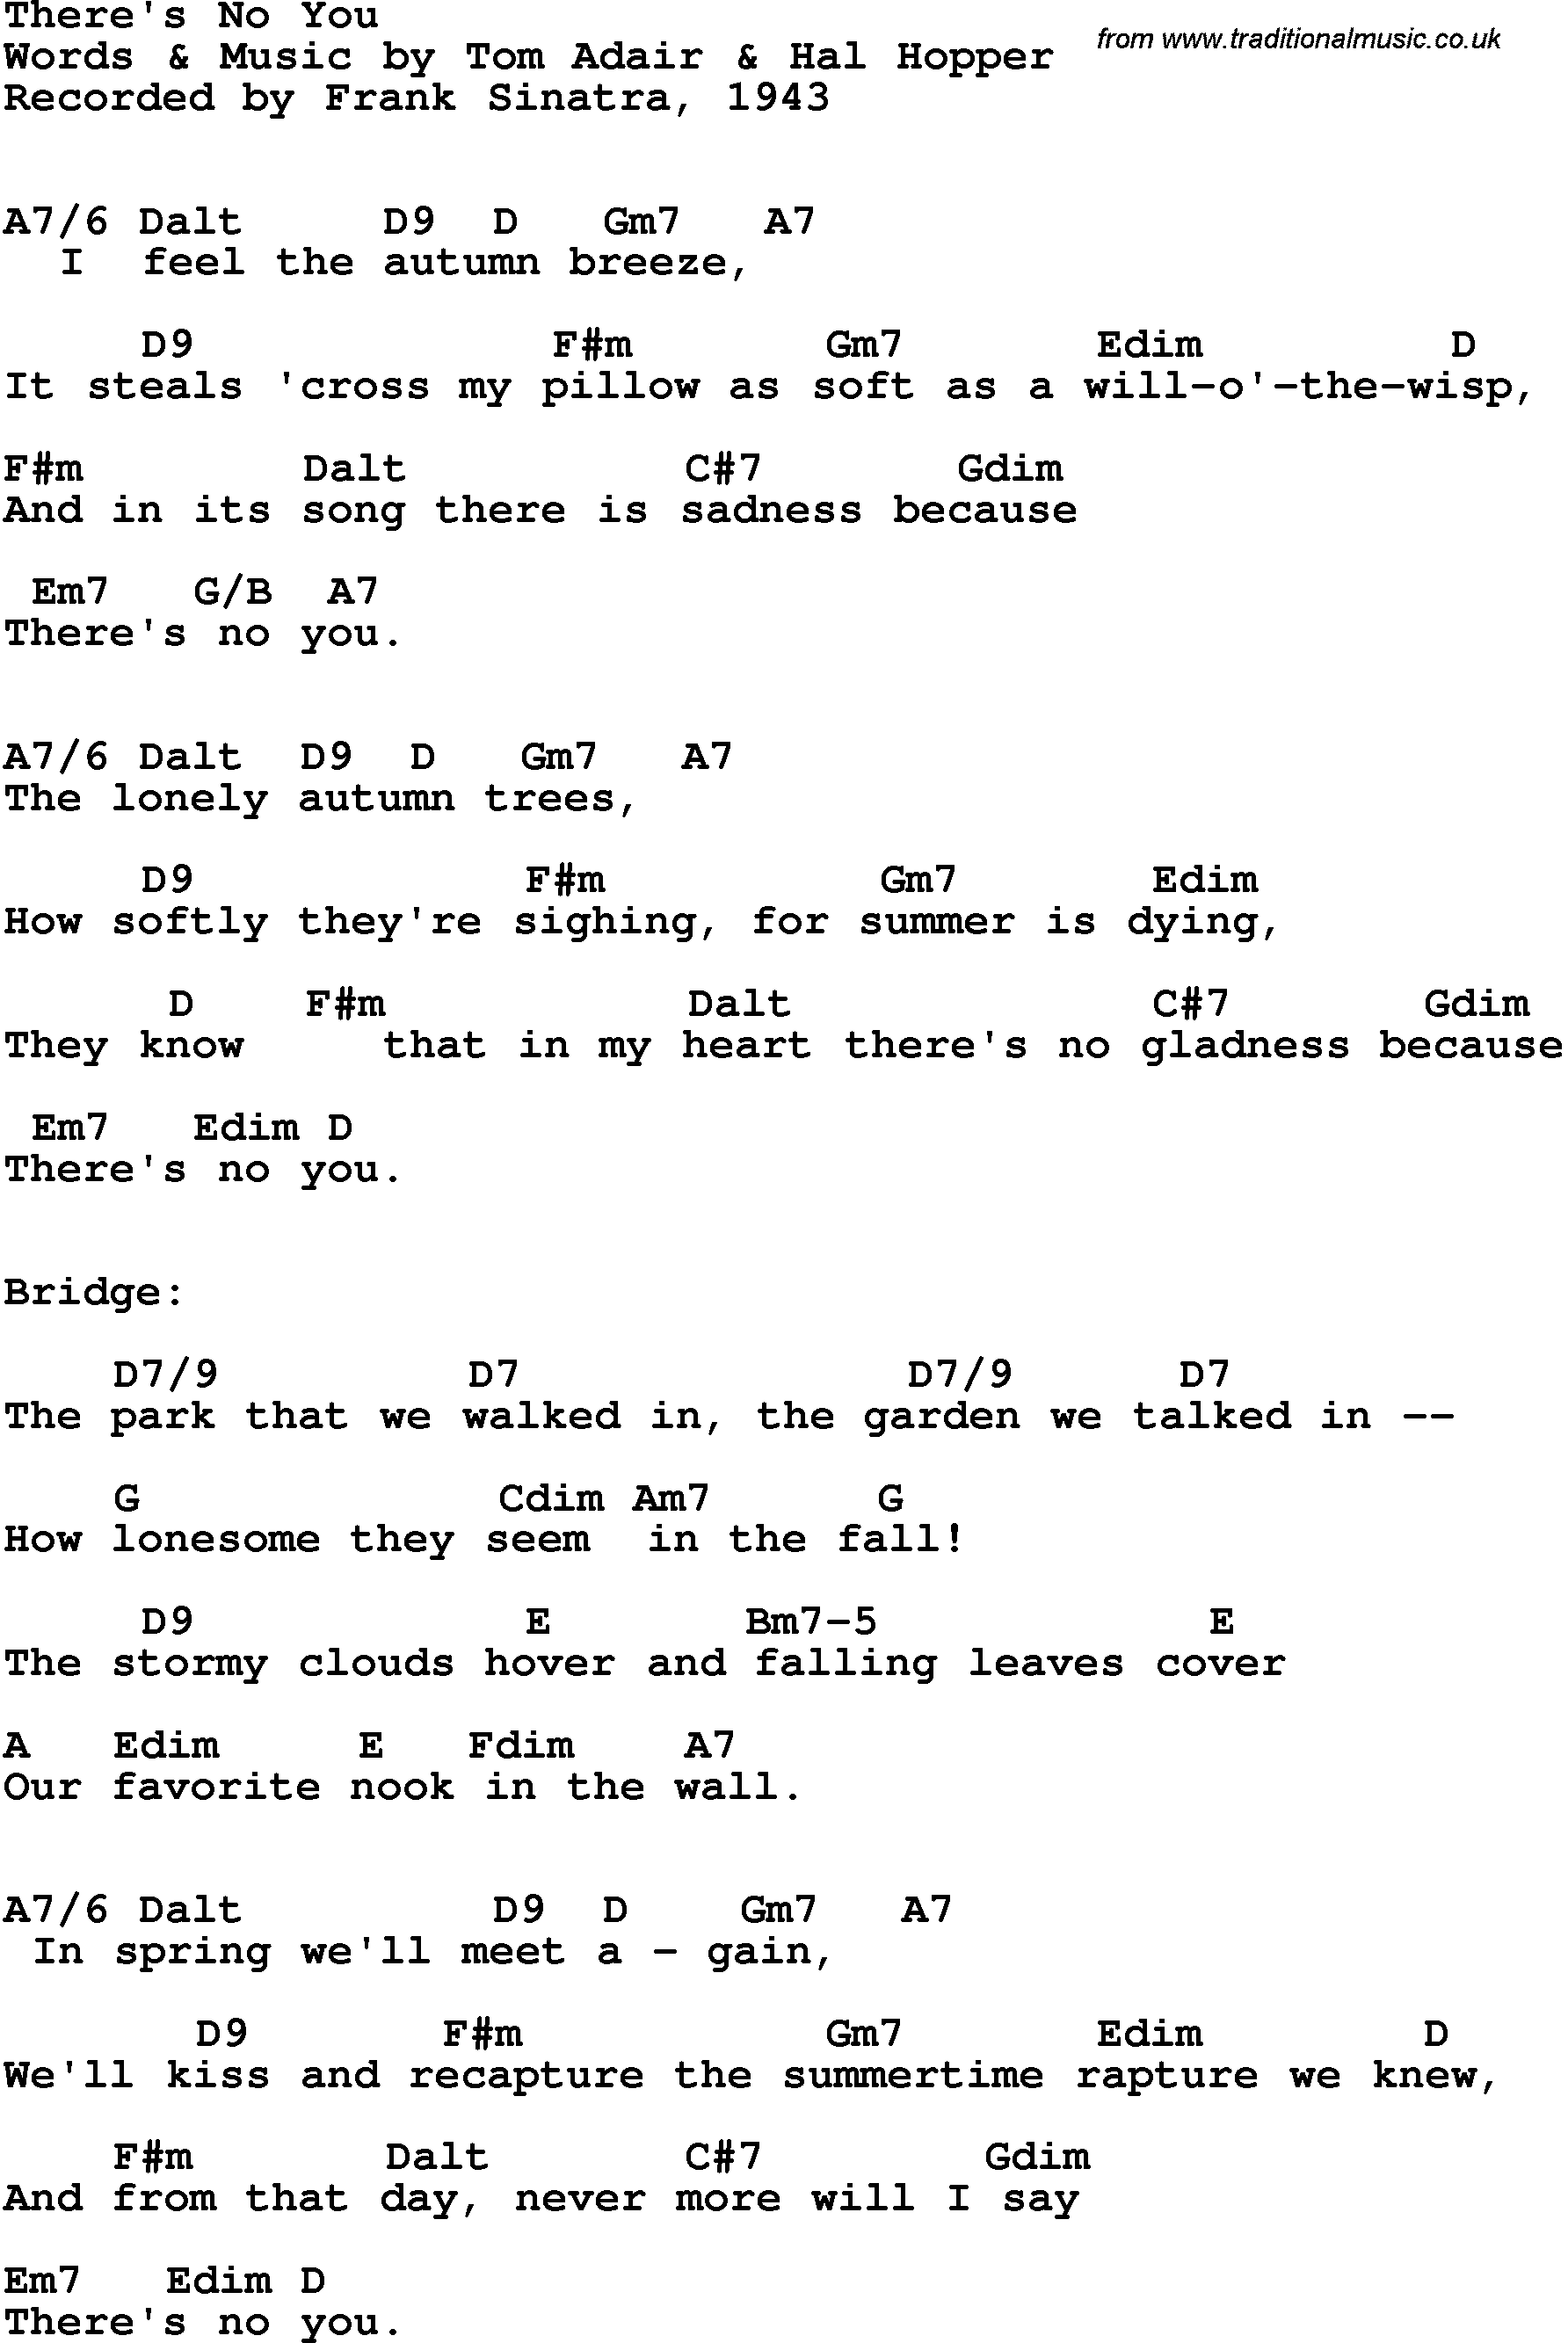 Song Lyrics with guitar chords for There's No You - Frank Sinatra, 1943